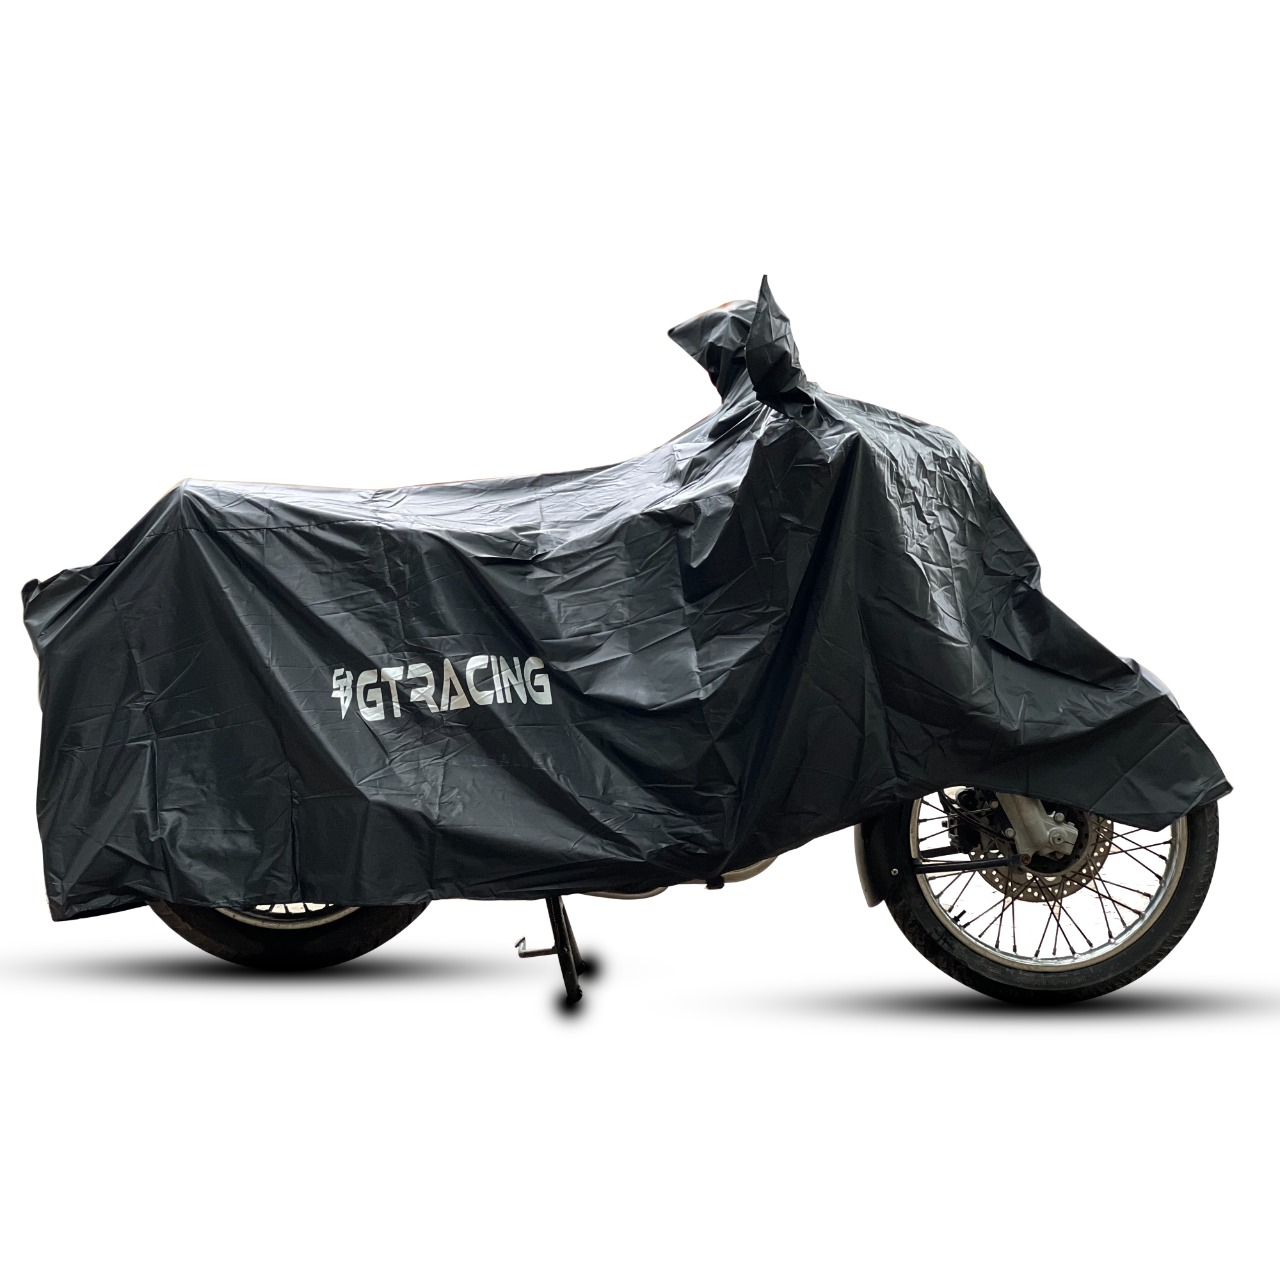 Steelbird 100% Waterproof Bike Cover GT Racing UV Protection Water-Resistant & Dustproof (Black PVC), Bike Body Cover With Carry Bag (All Bikes Upto Cruiser Bikes Size)